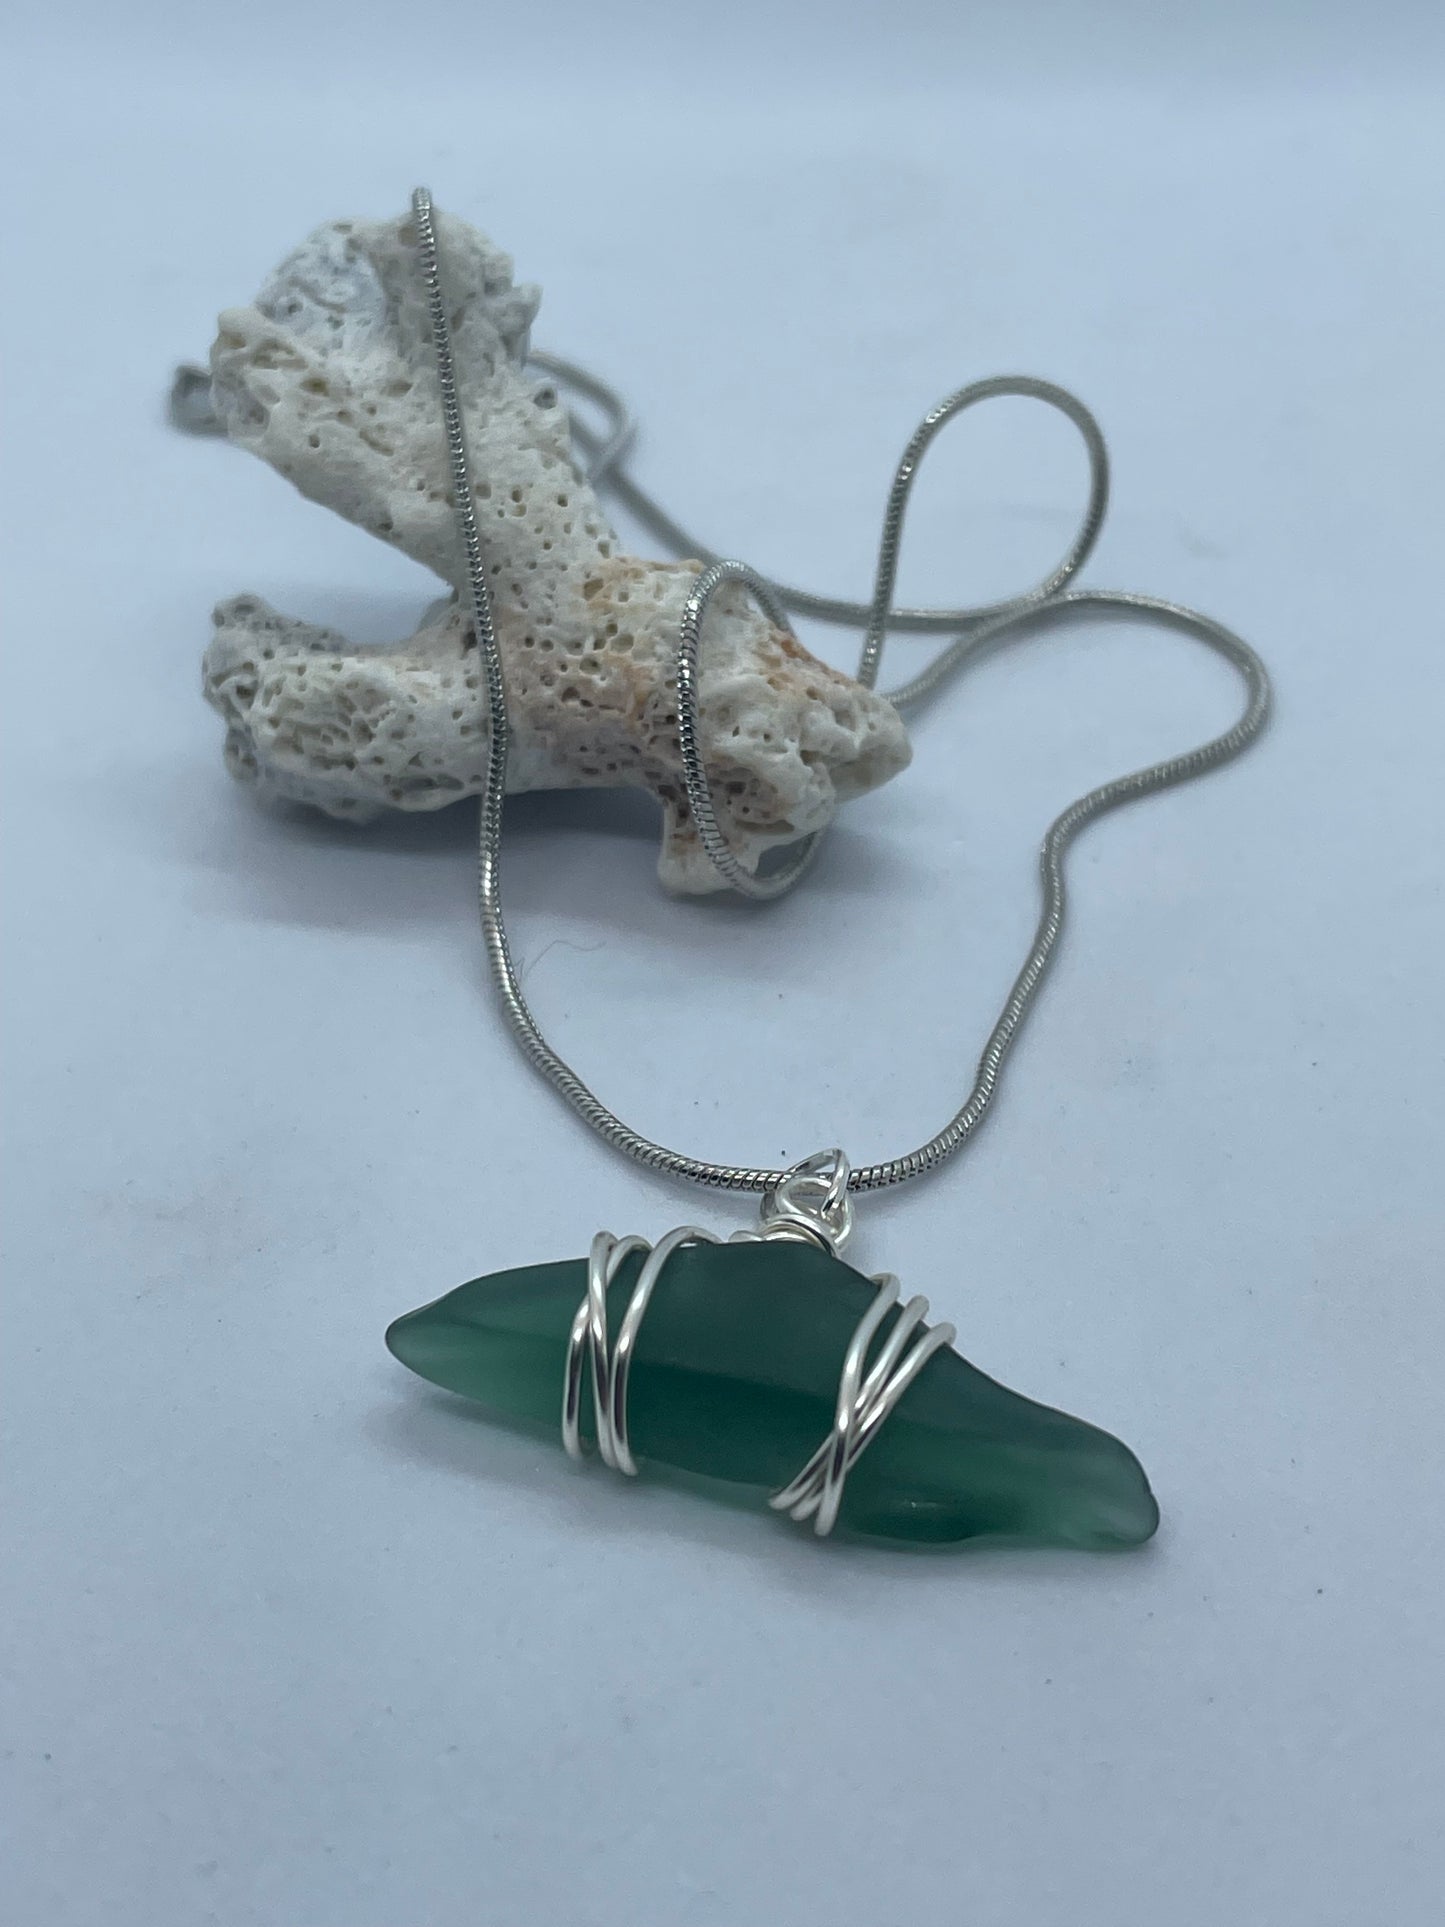 Green seaglass necklace with silver wrap